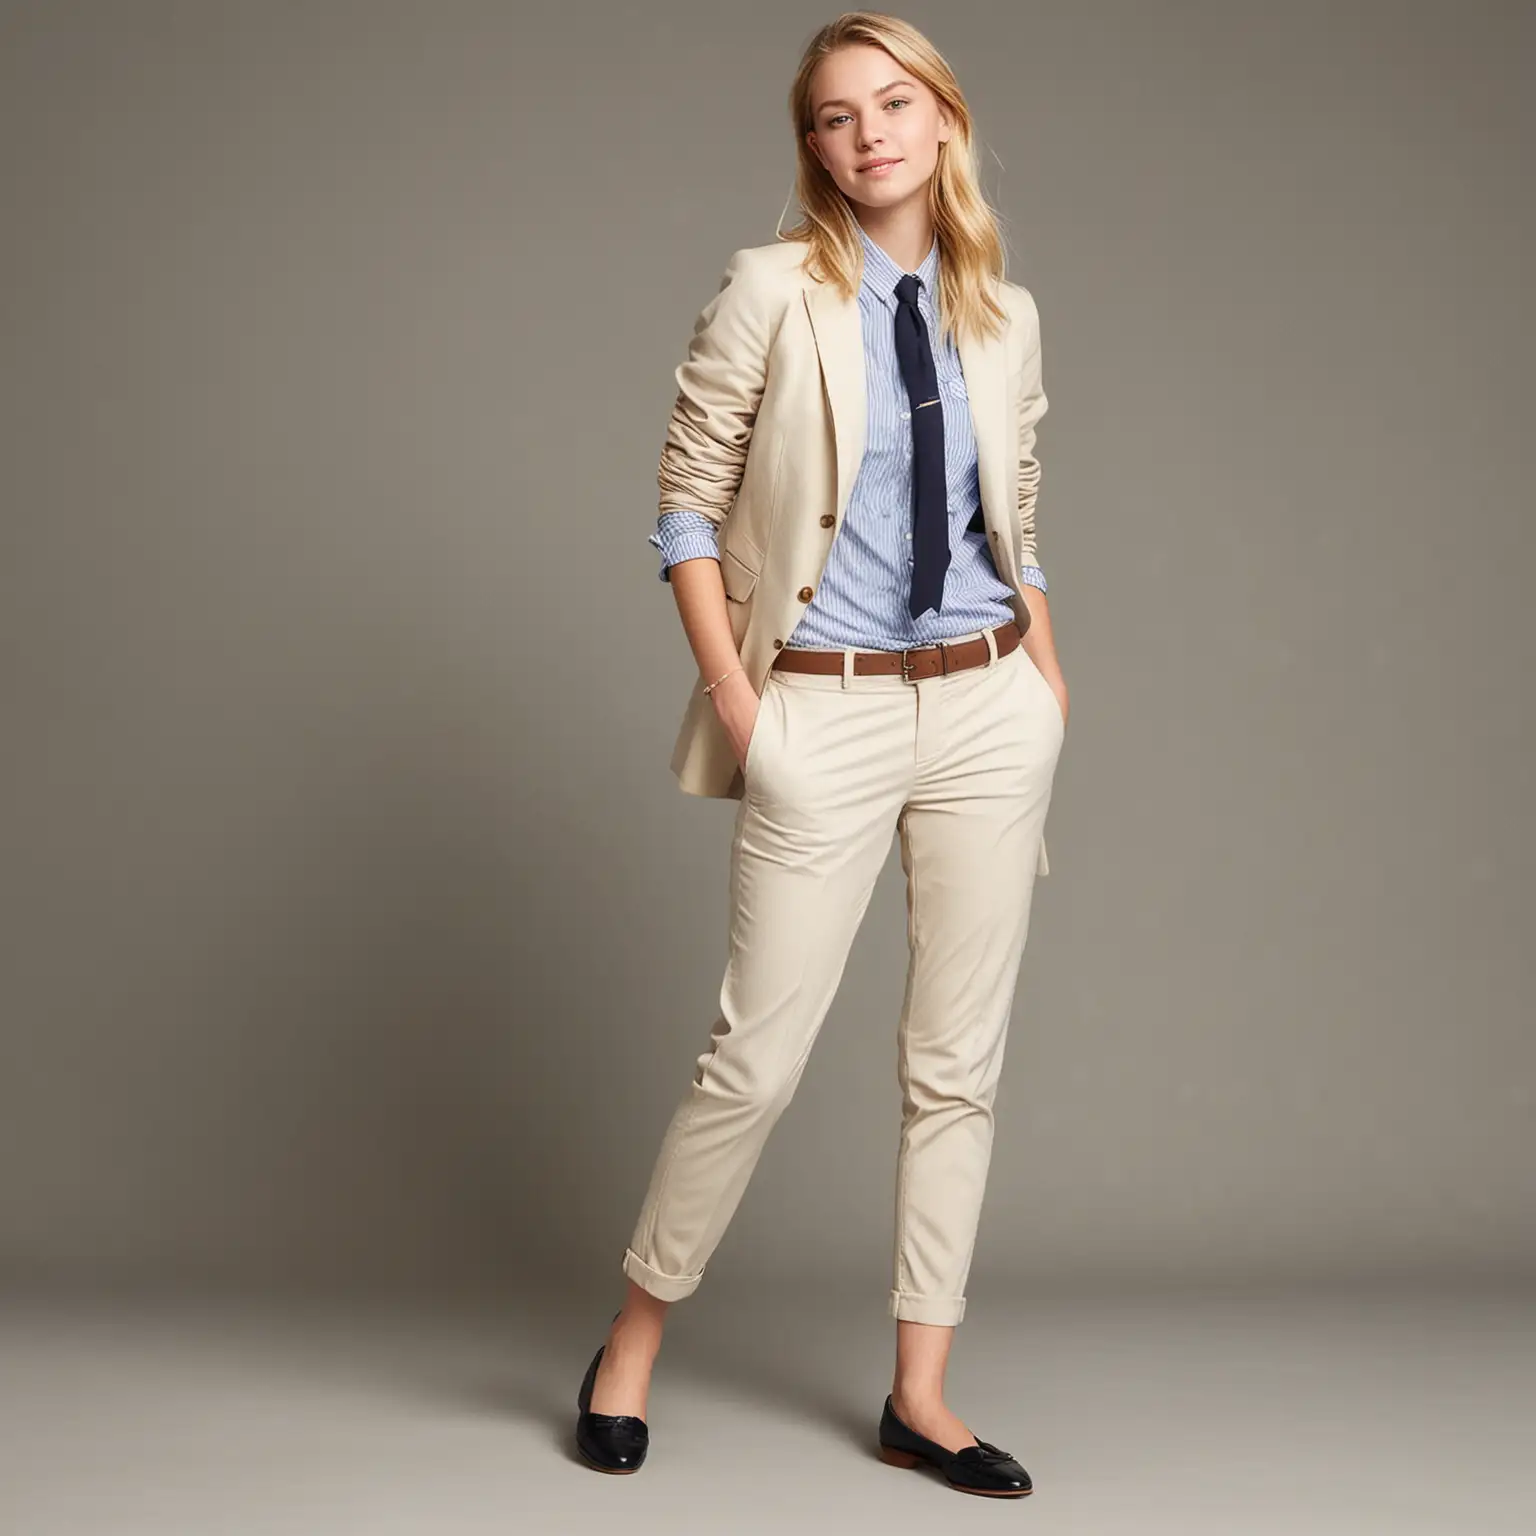 Blonde Teenage Girl in Professional J Crew Style Outfit for Job Interview